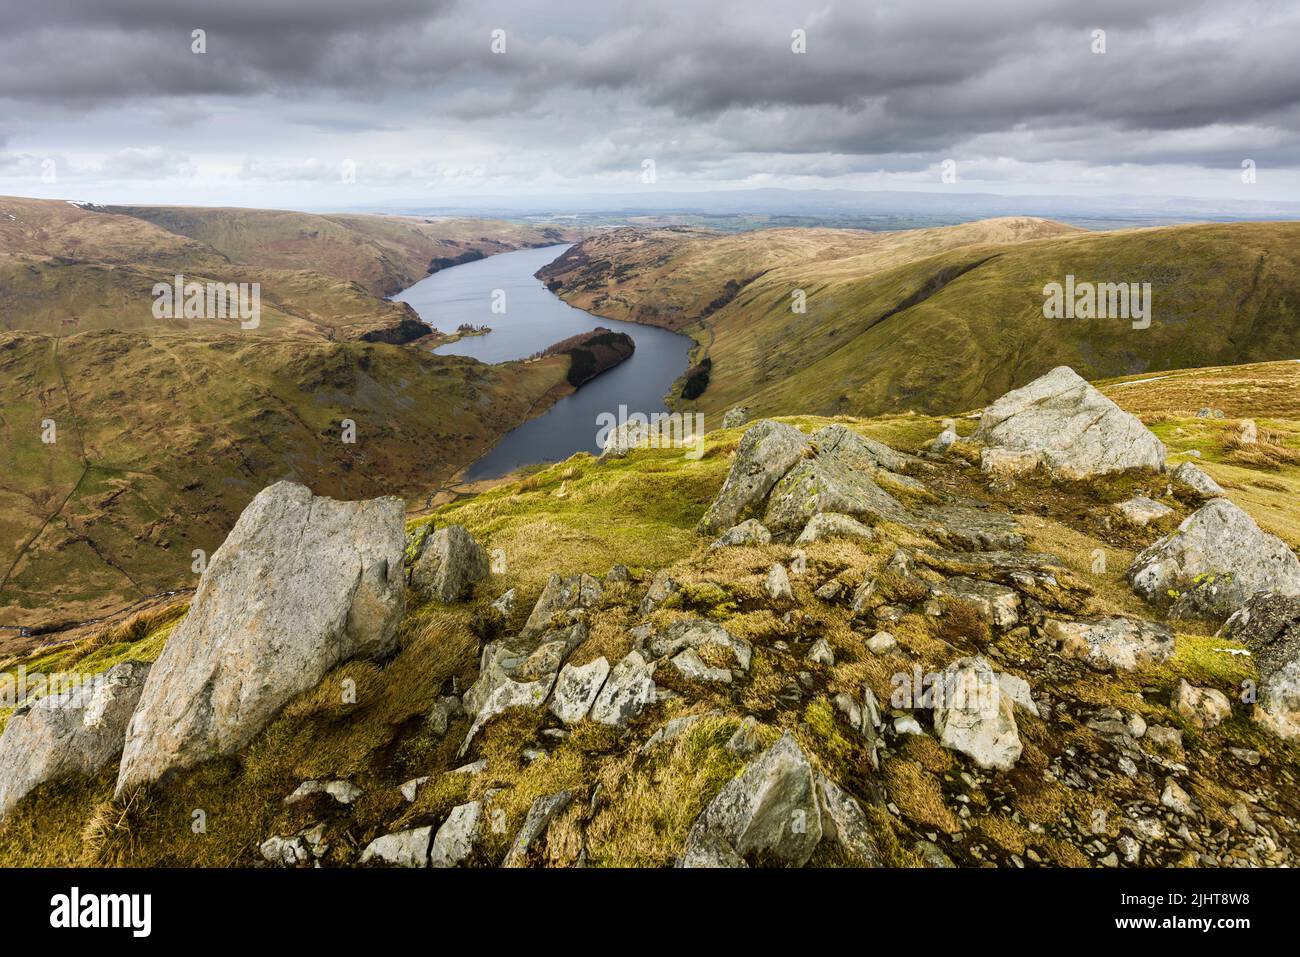 Haweswater Reservoir from Harter Fell in the Lake District National Park, Cumbria, England. Stock Photo